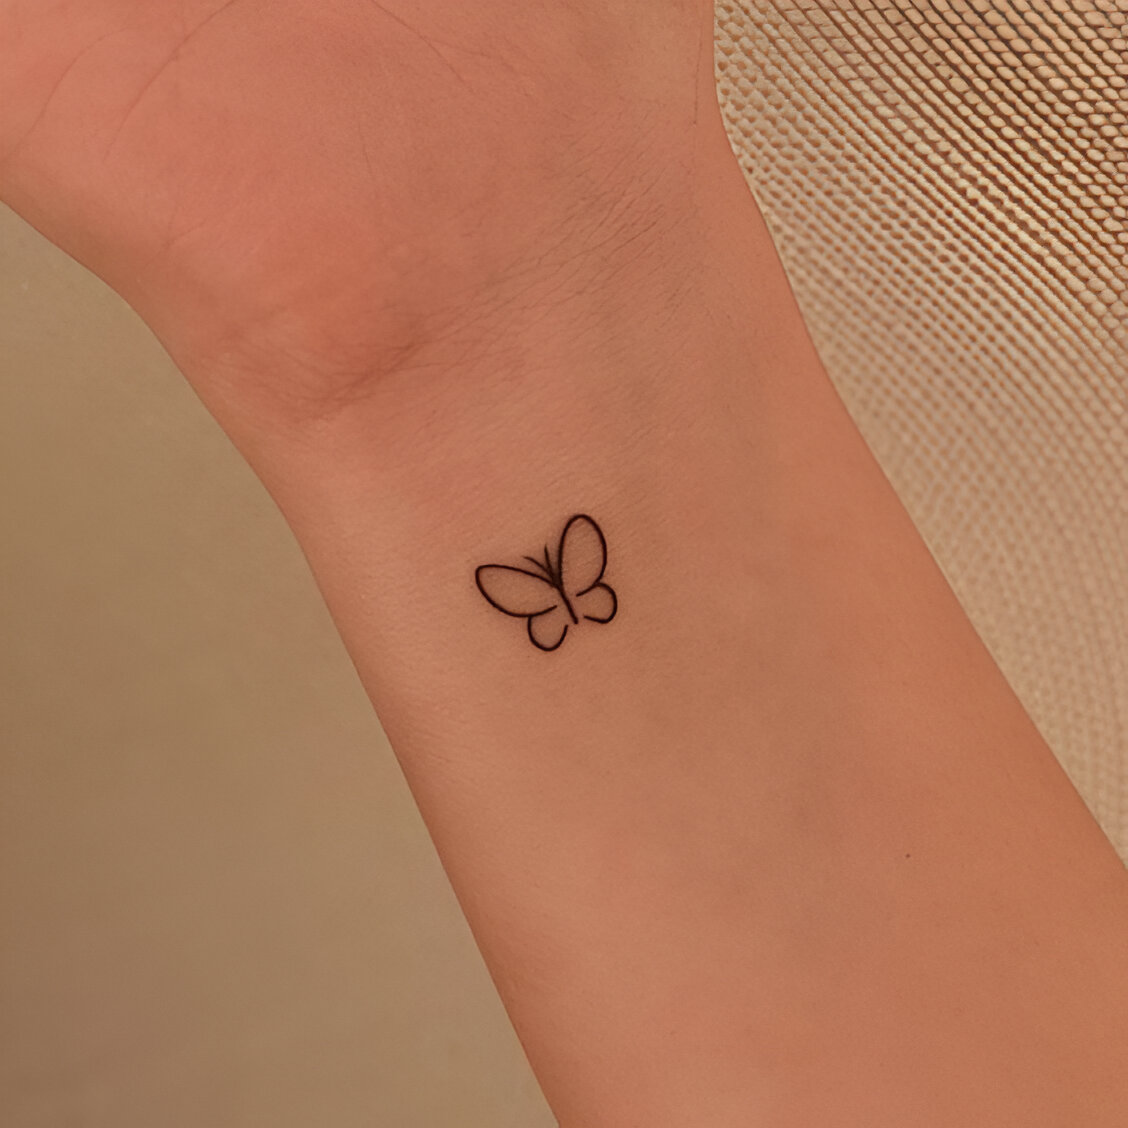 Wrist Tattoos With Butterfly